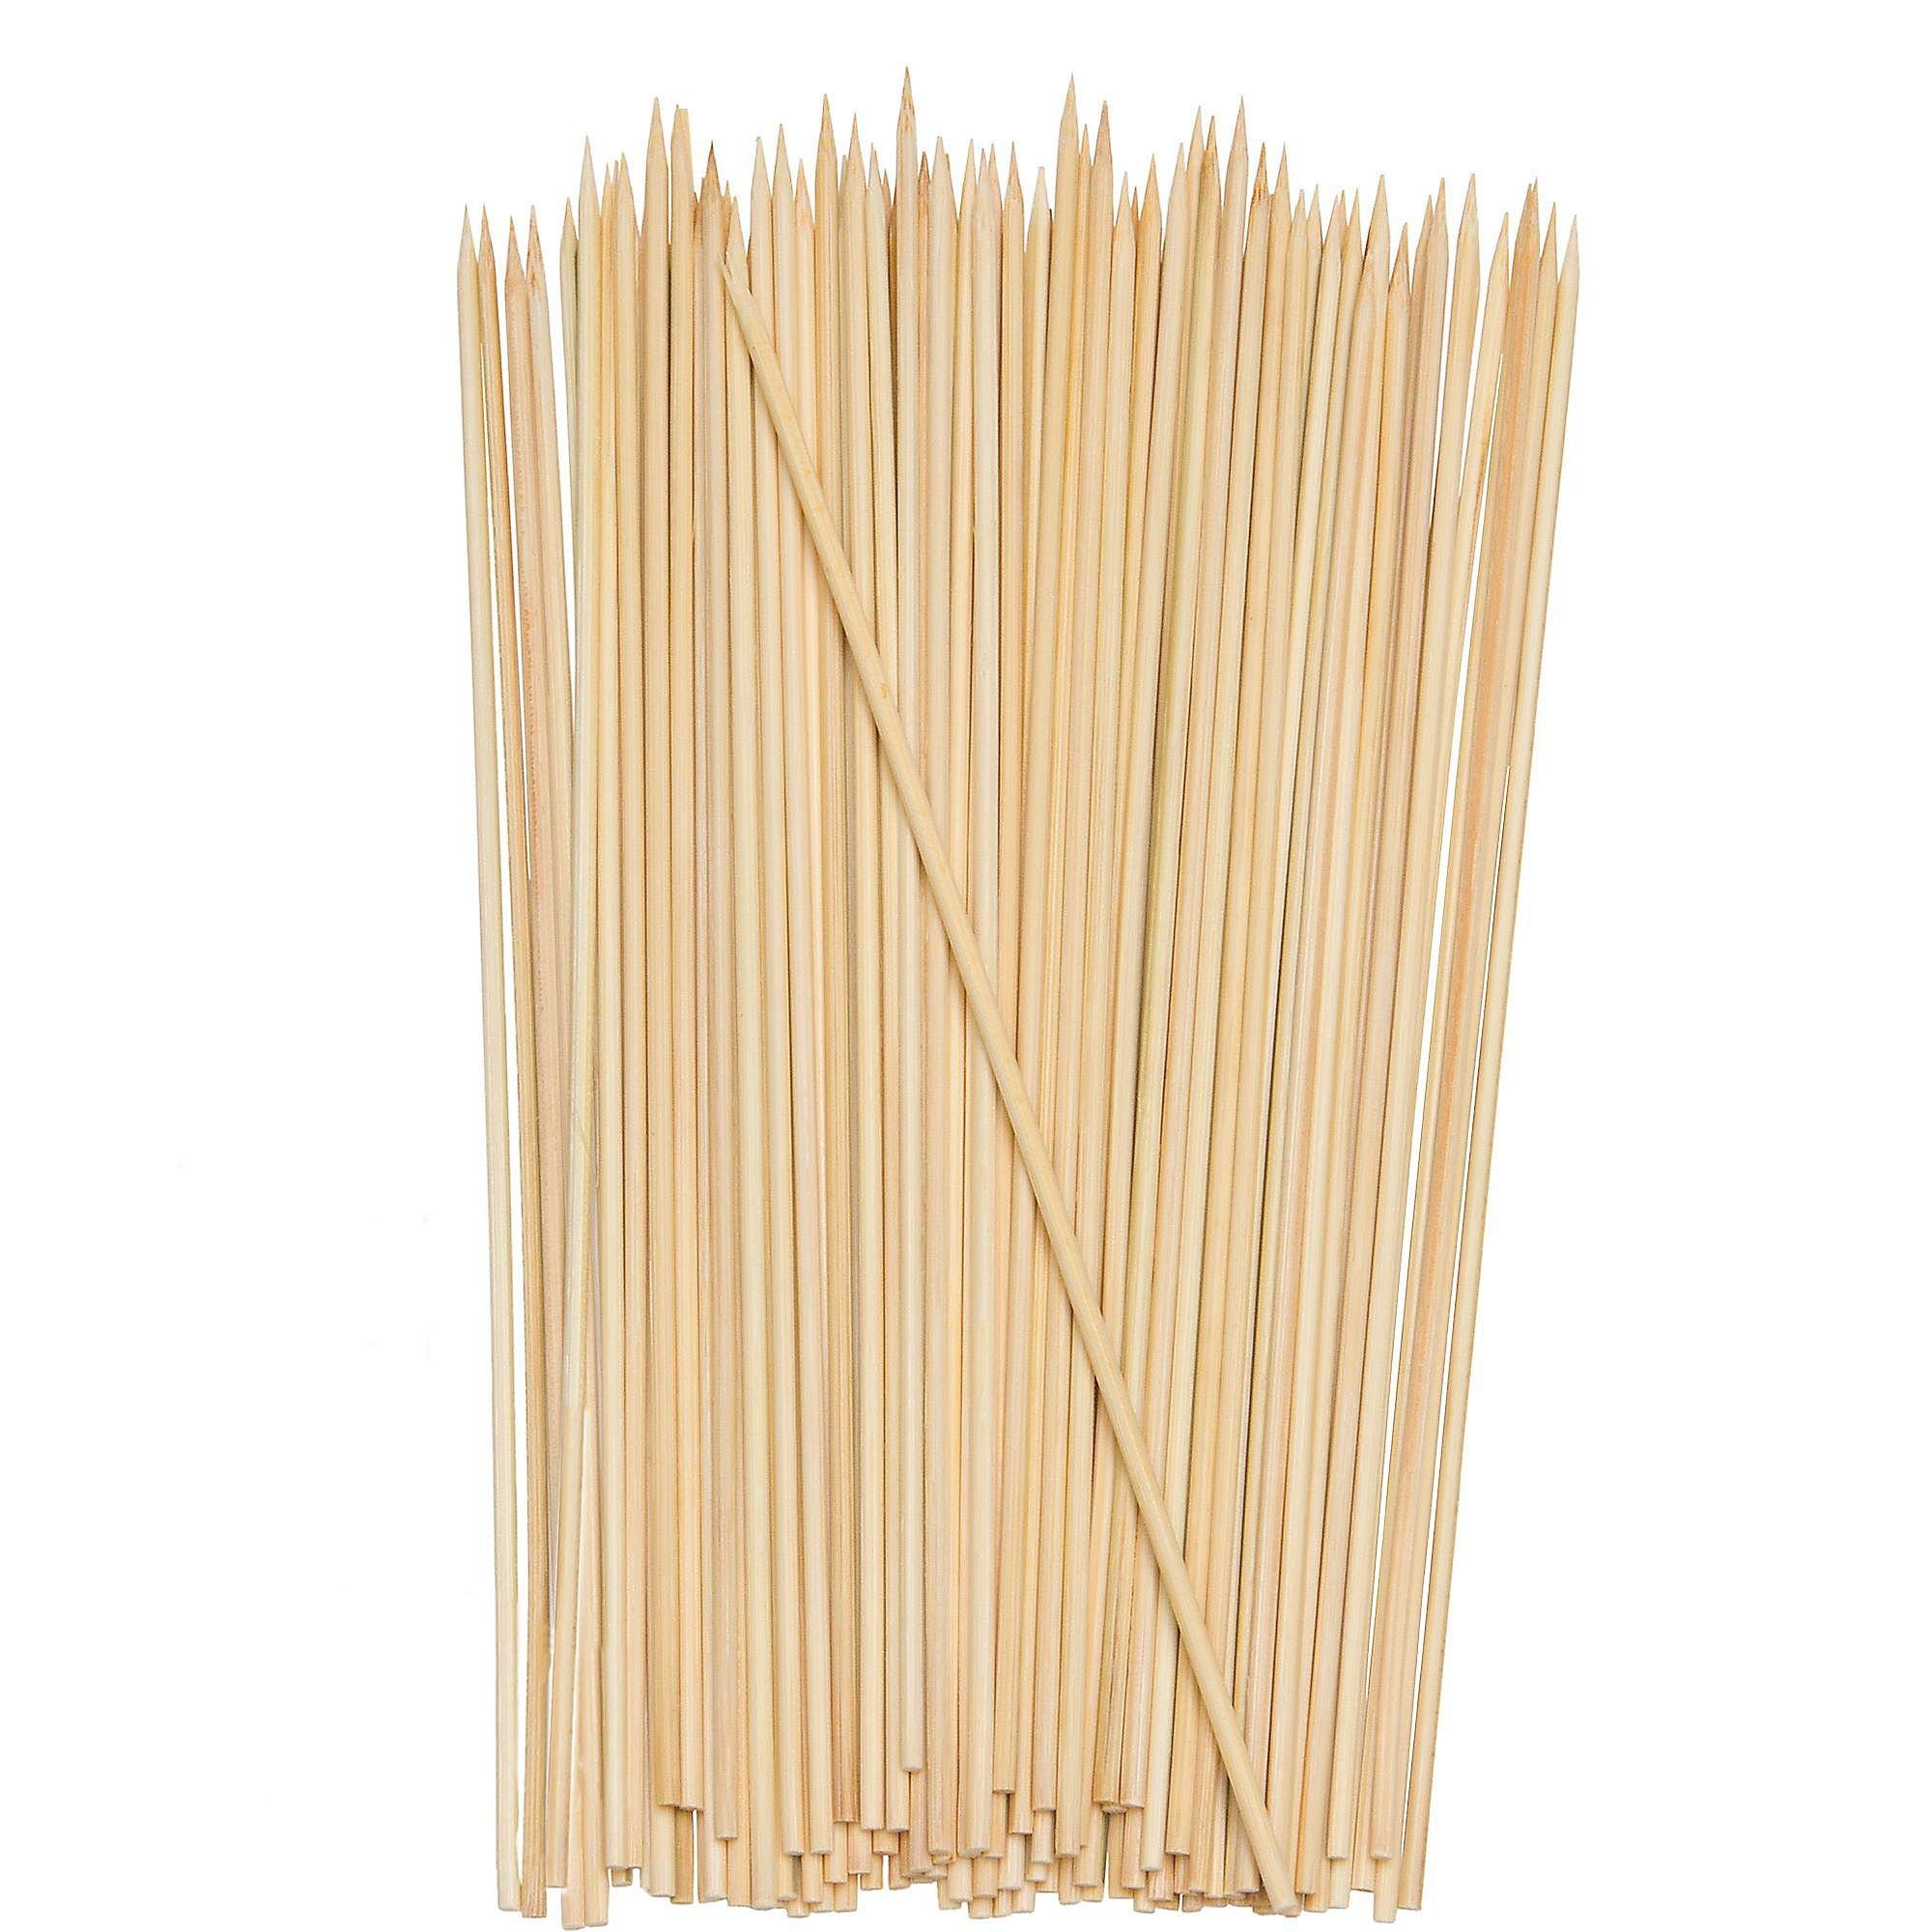 Bamboo Skewers 100ct | Party City